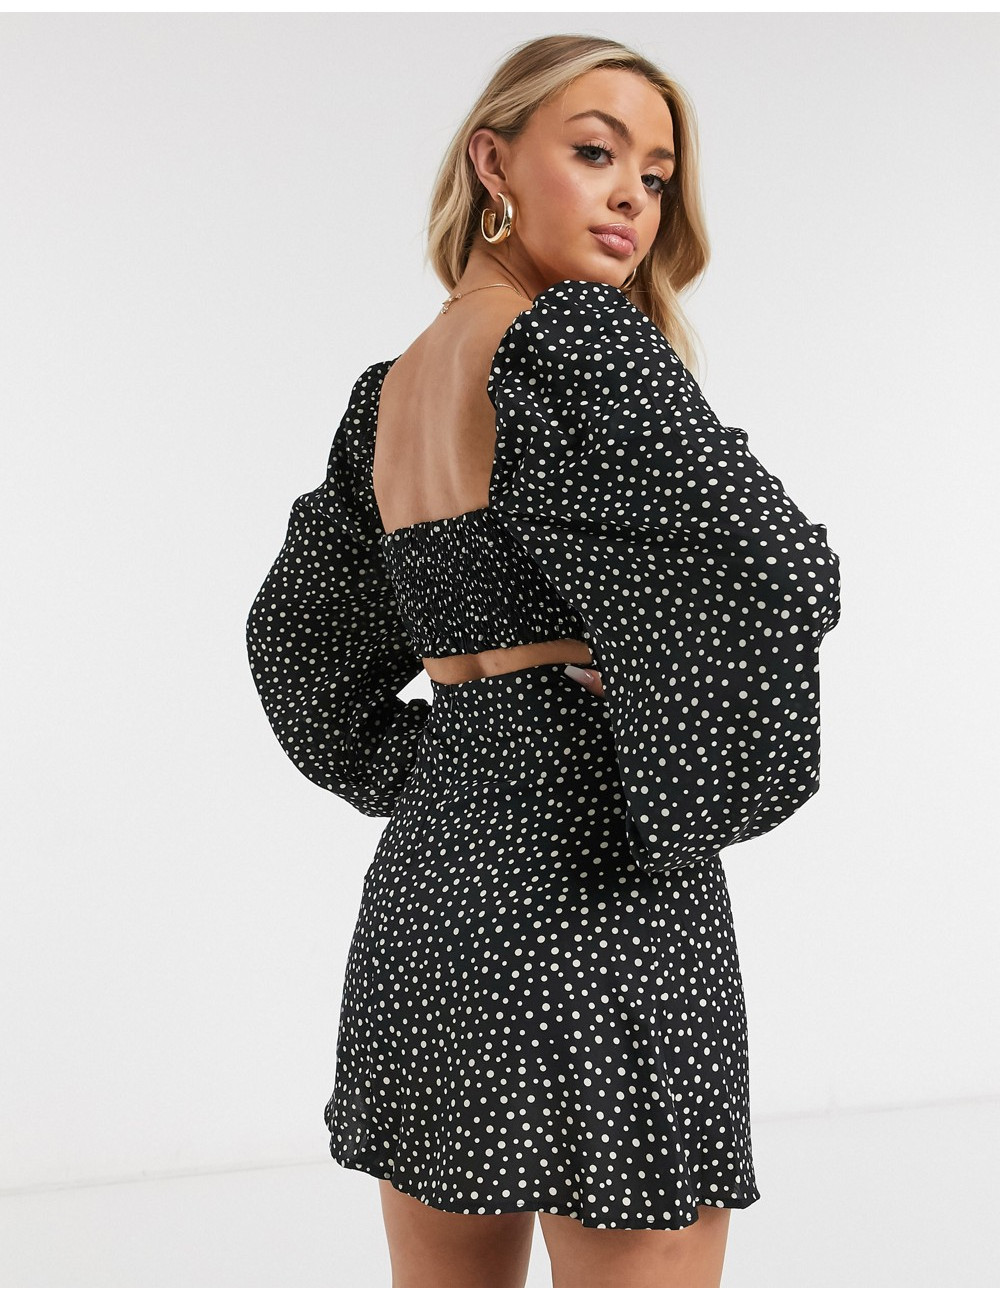 Missguided exclusive...